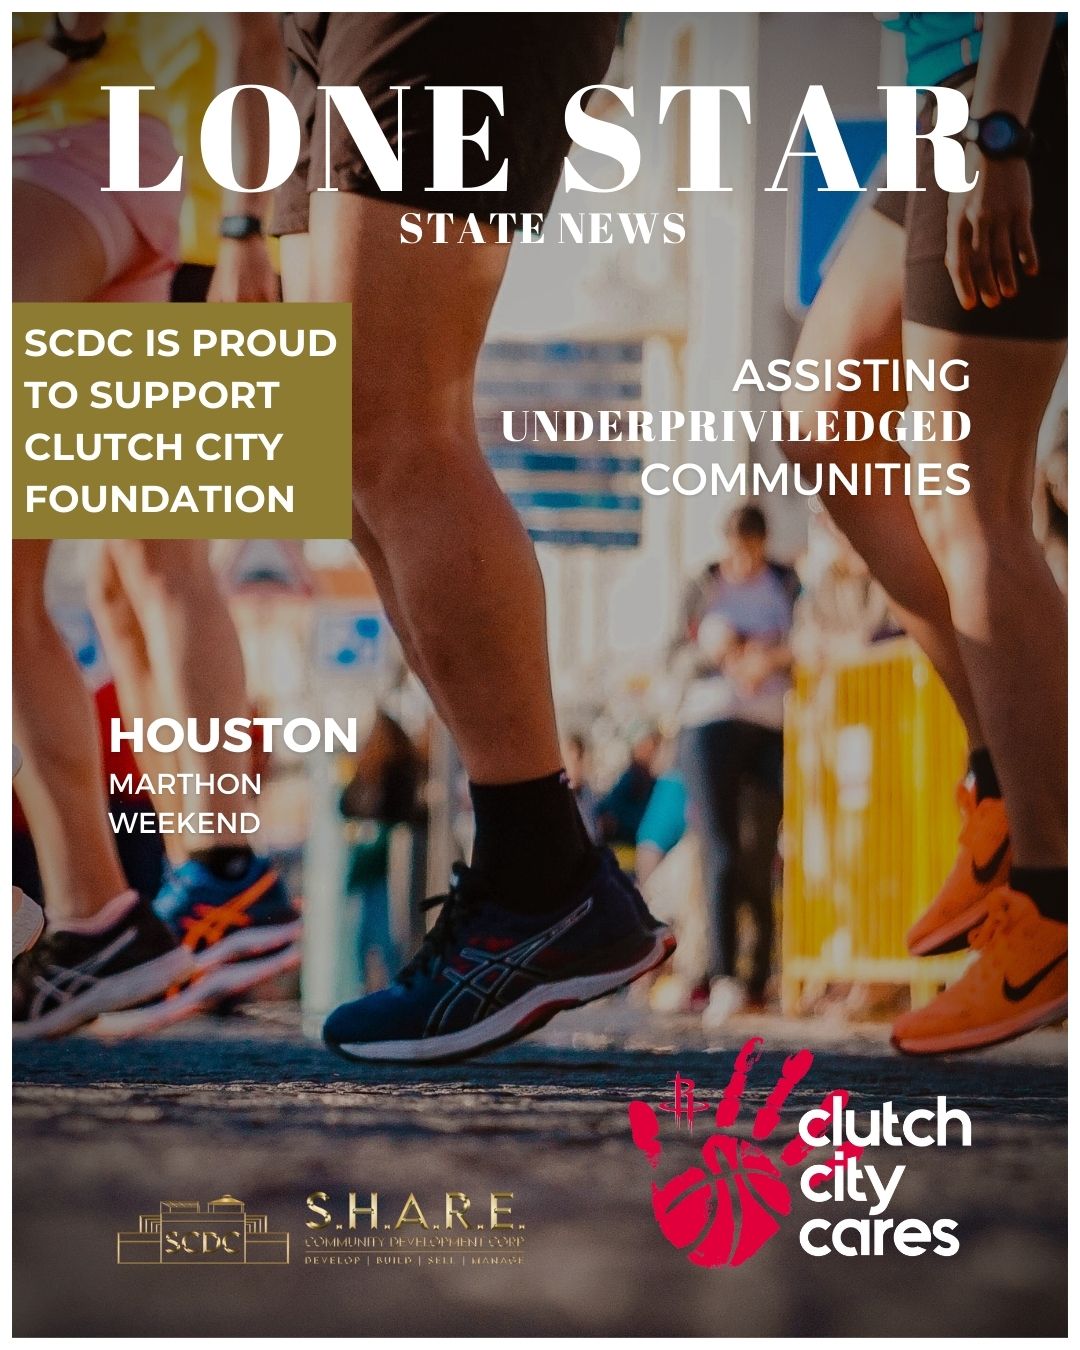 SCDC Is Proud To Support The Clutch City Foundation By Donating Funds To Assist Underprivileged Communities